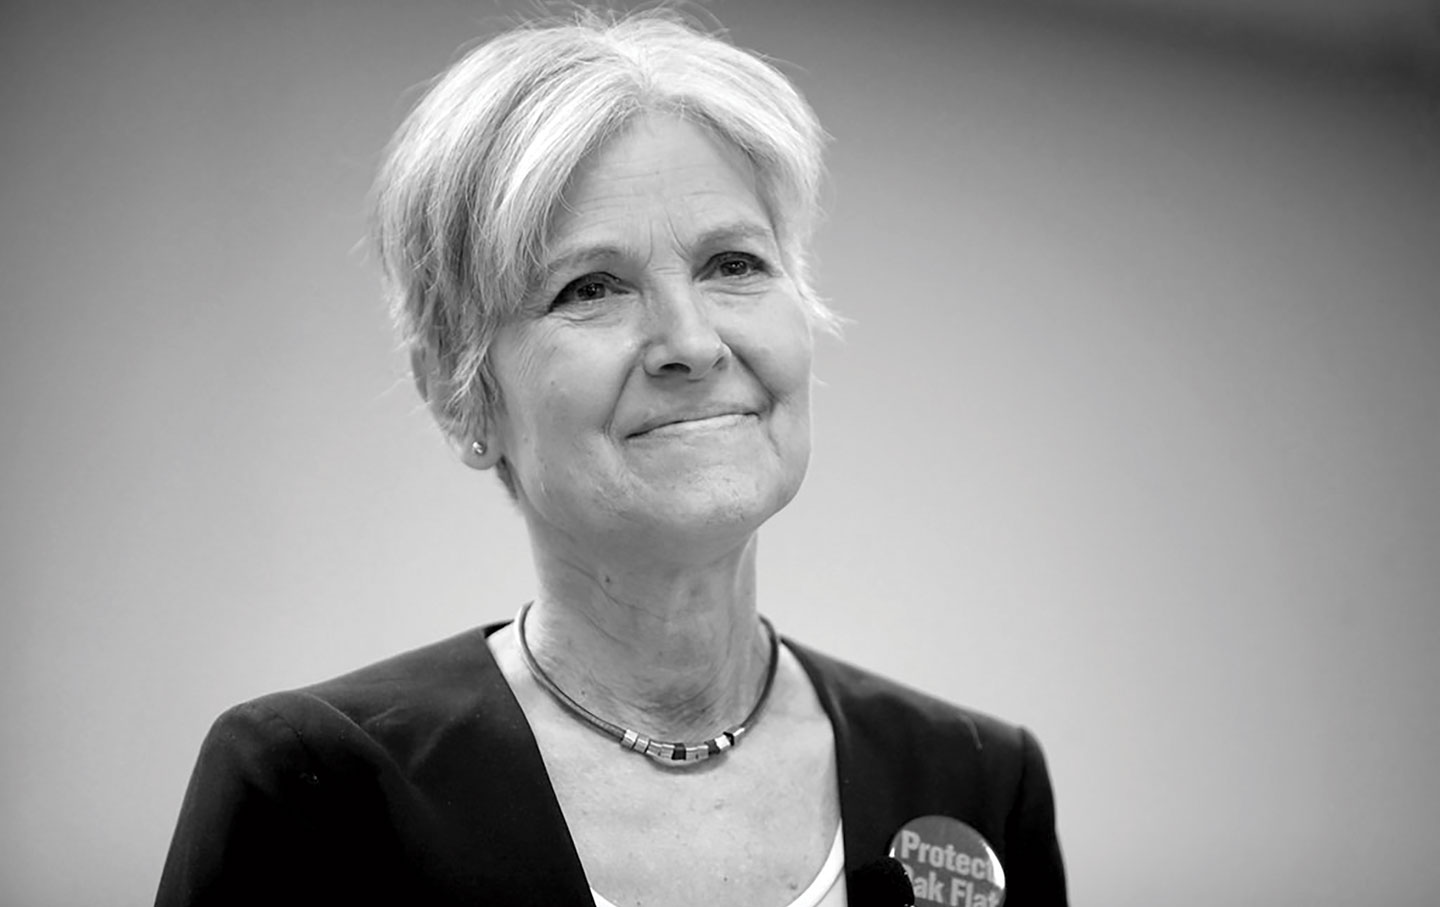 Your Vote for Jill Stein Is a Wasted Vote